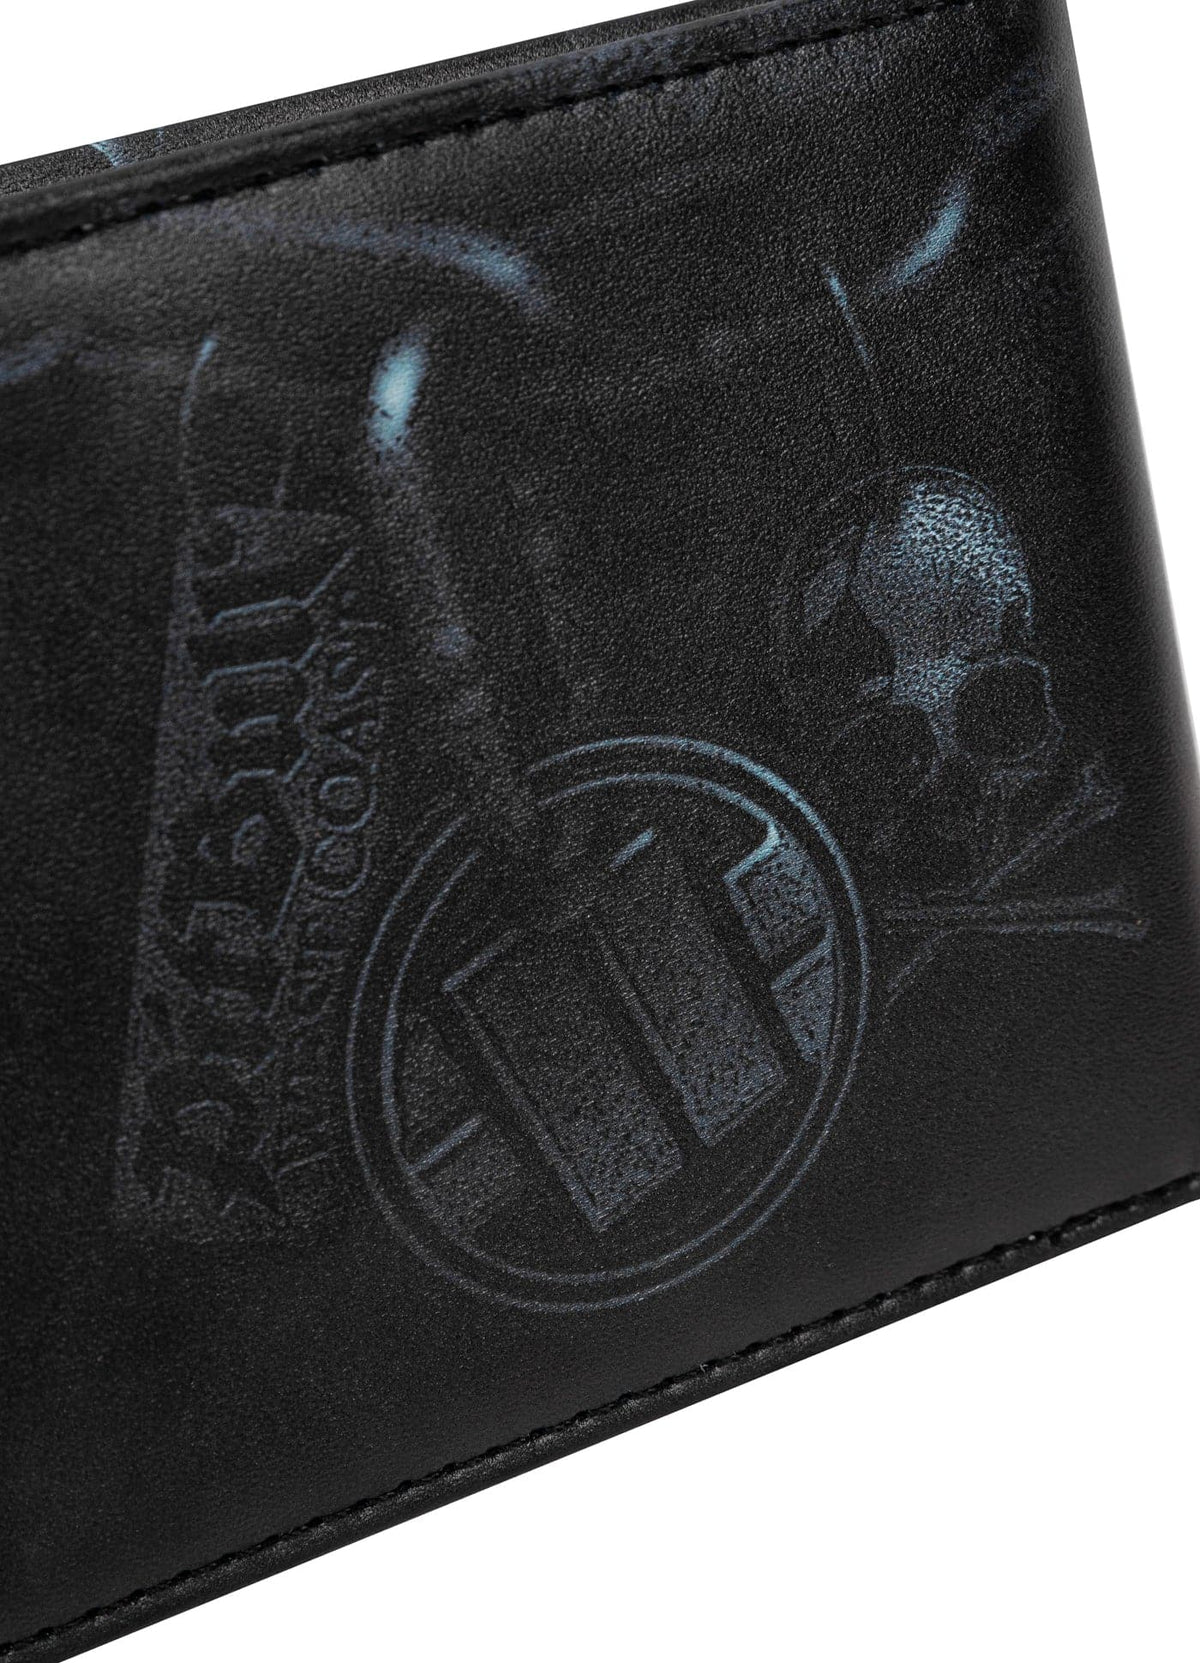 BORN IN 1989 Black Leather Wallet